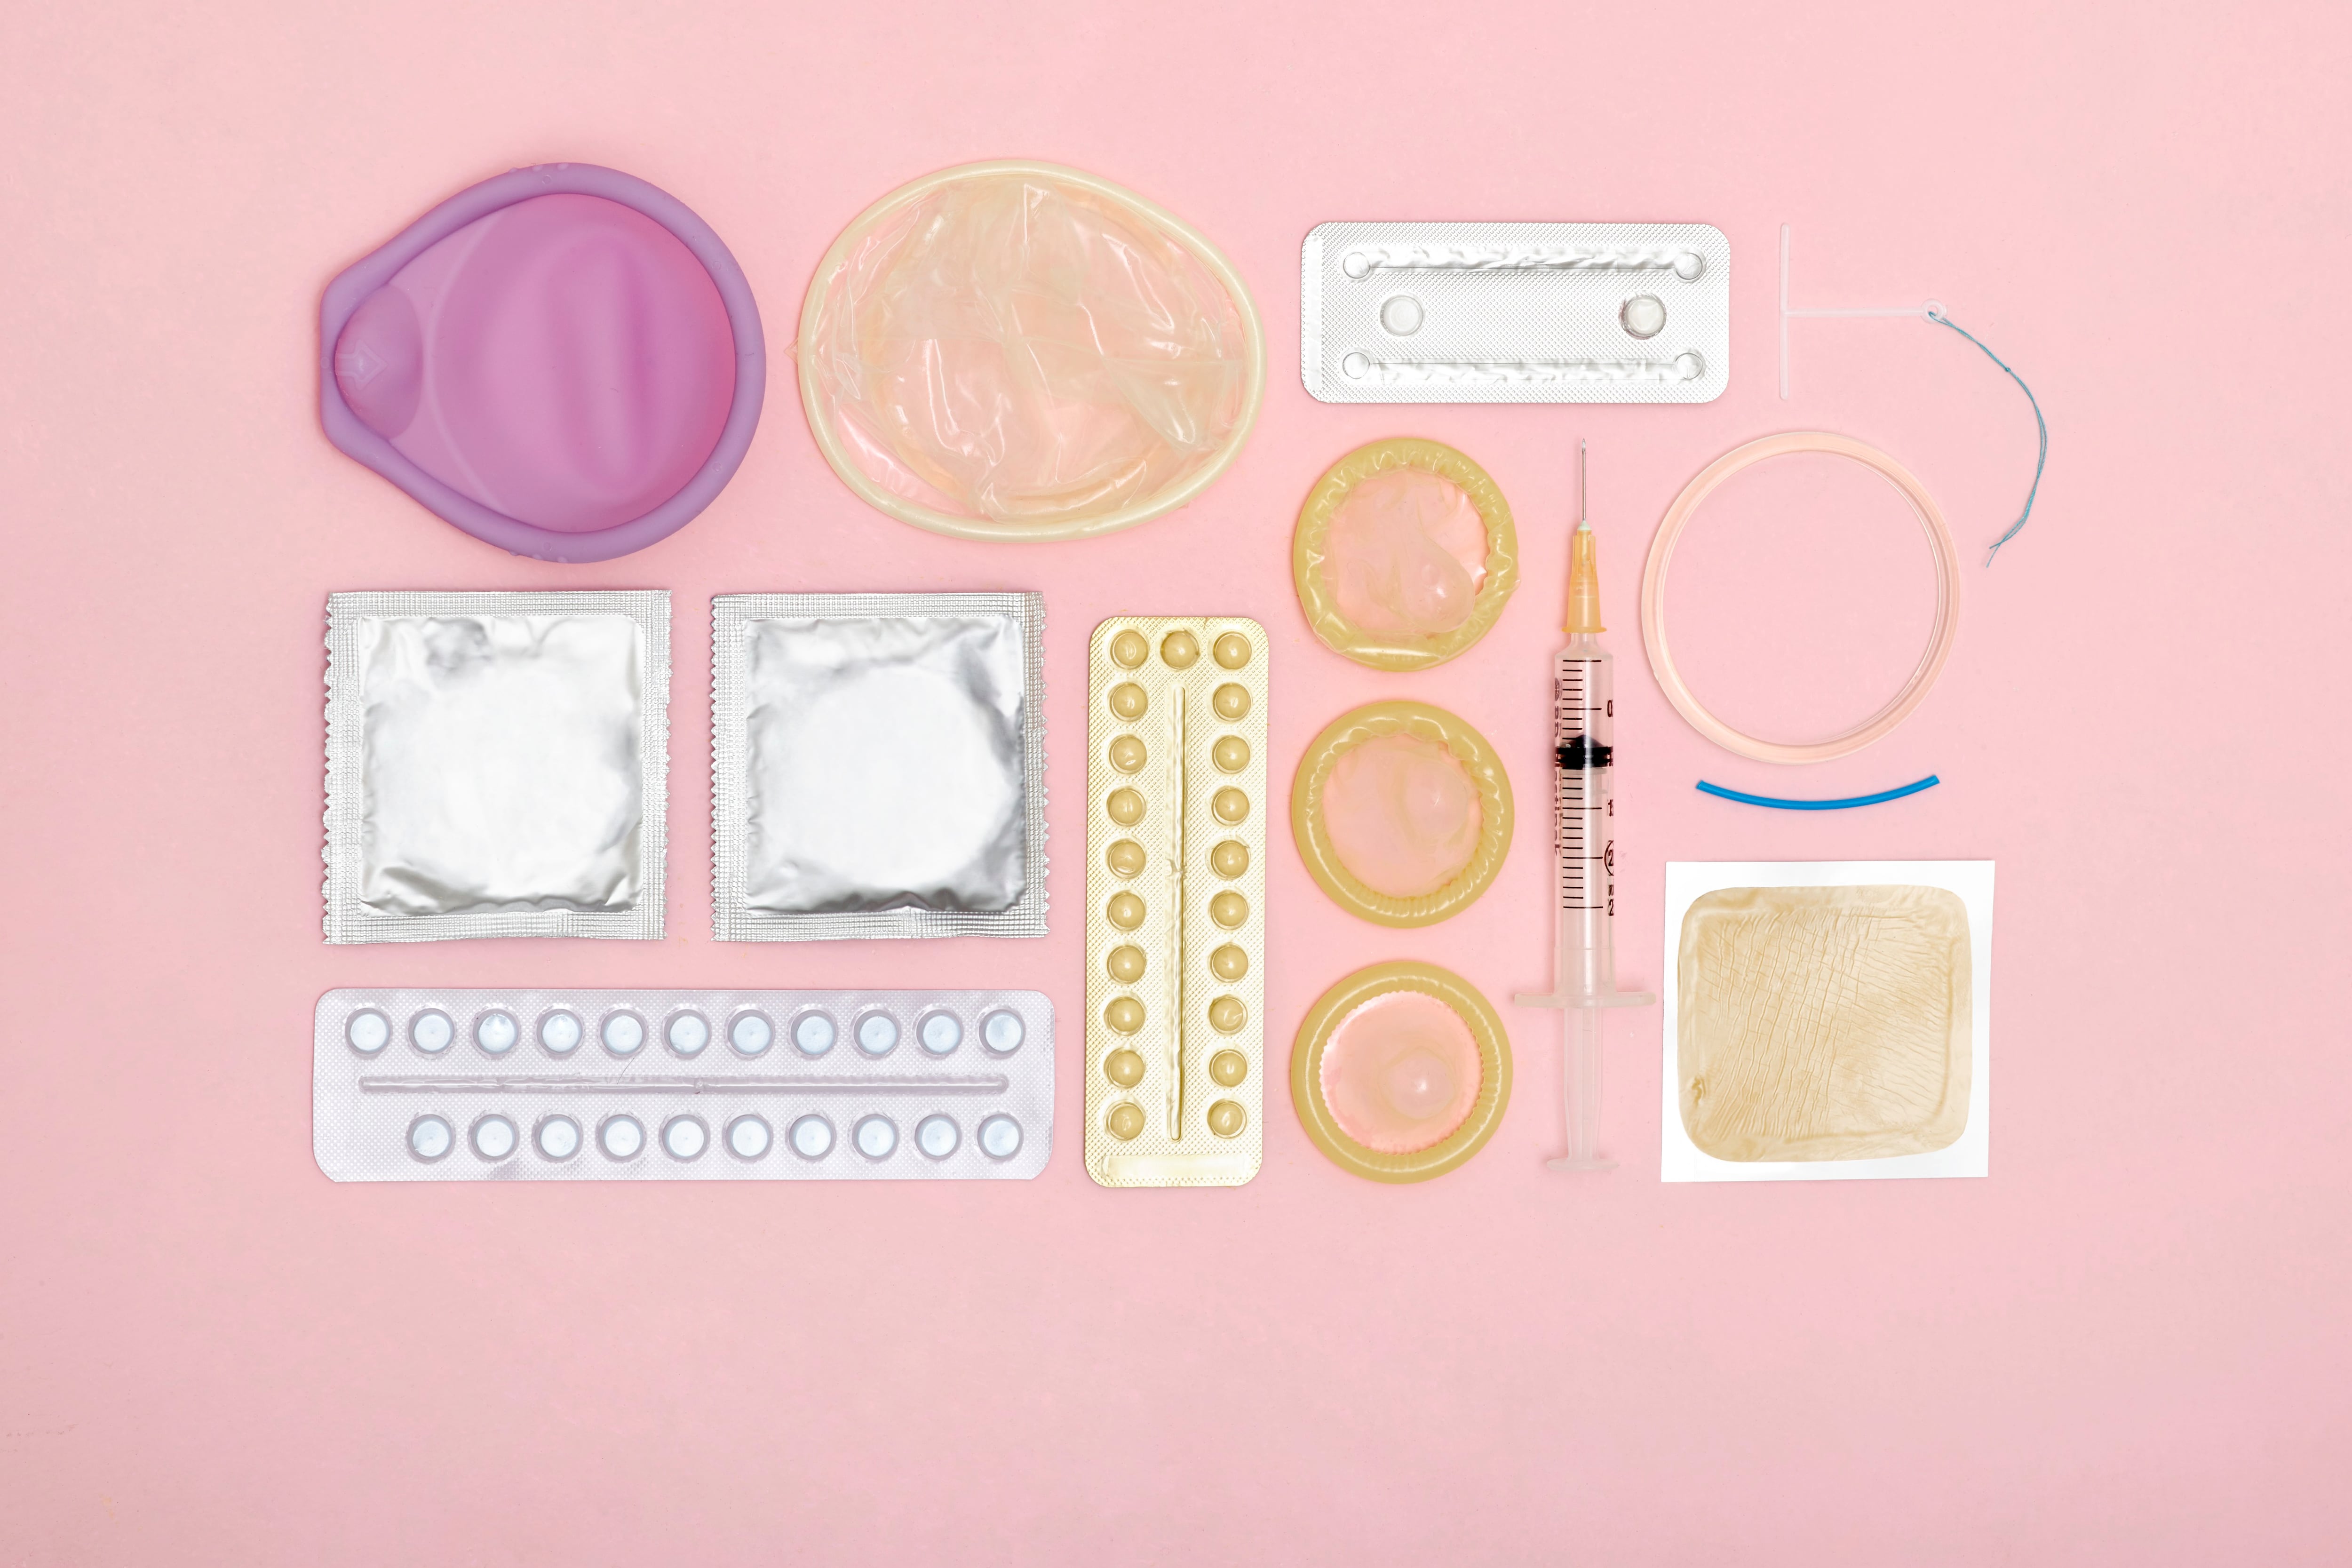 Various contraception items rest against a pink background.